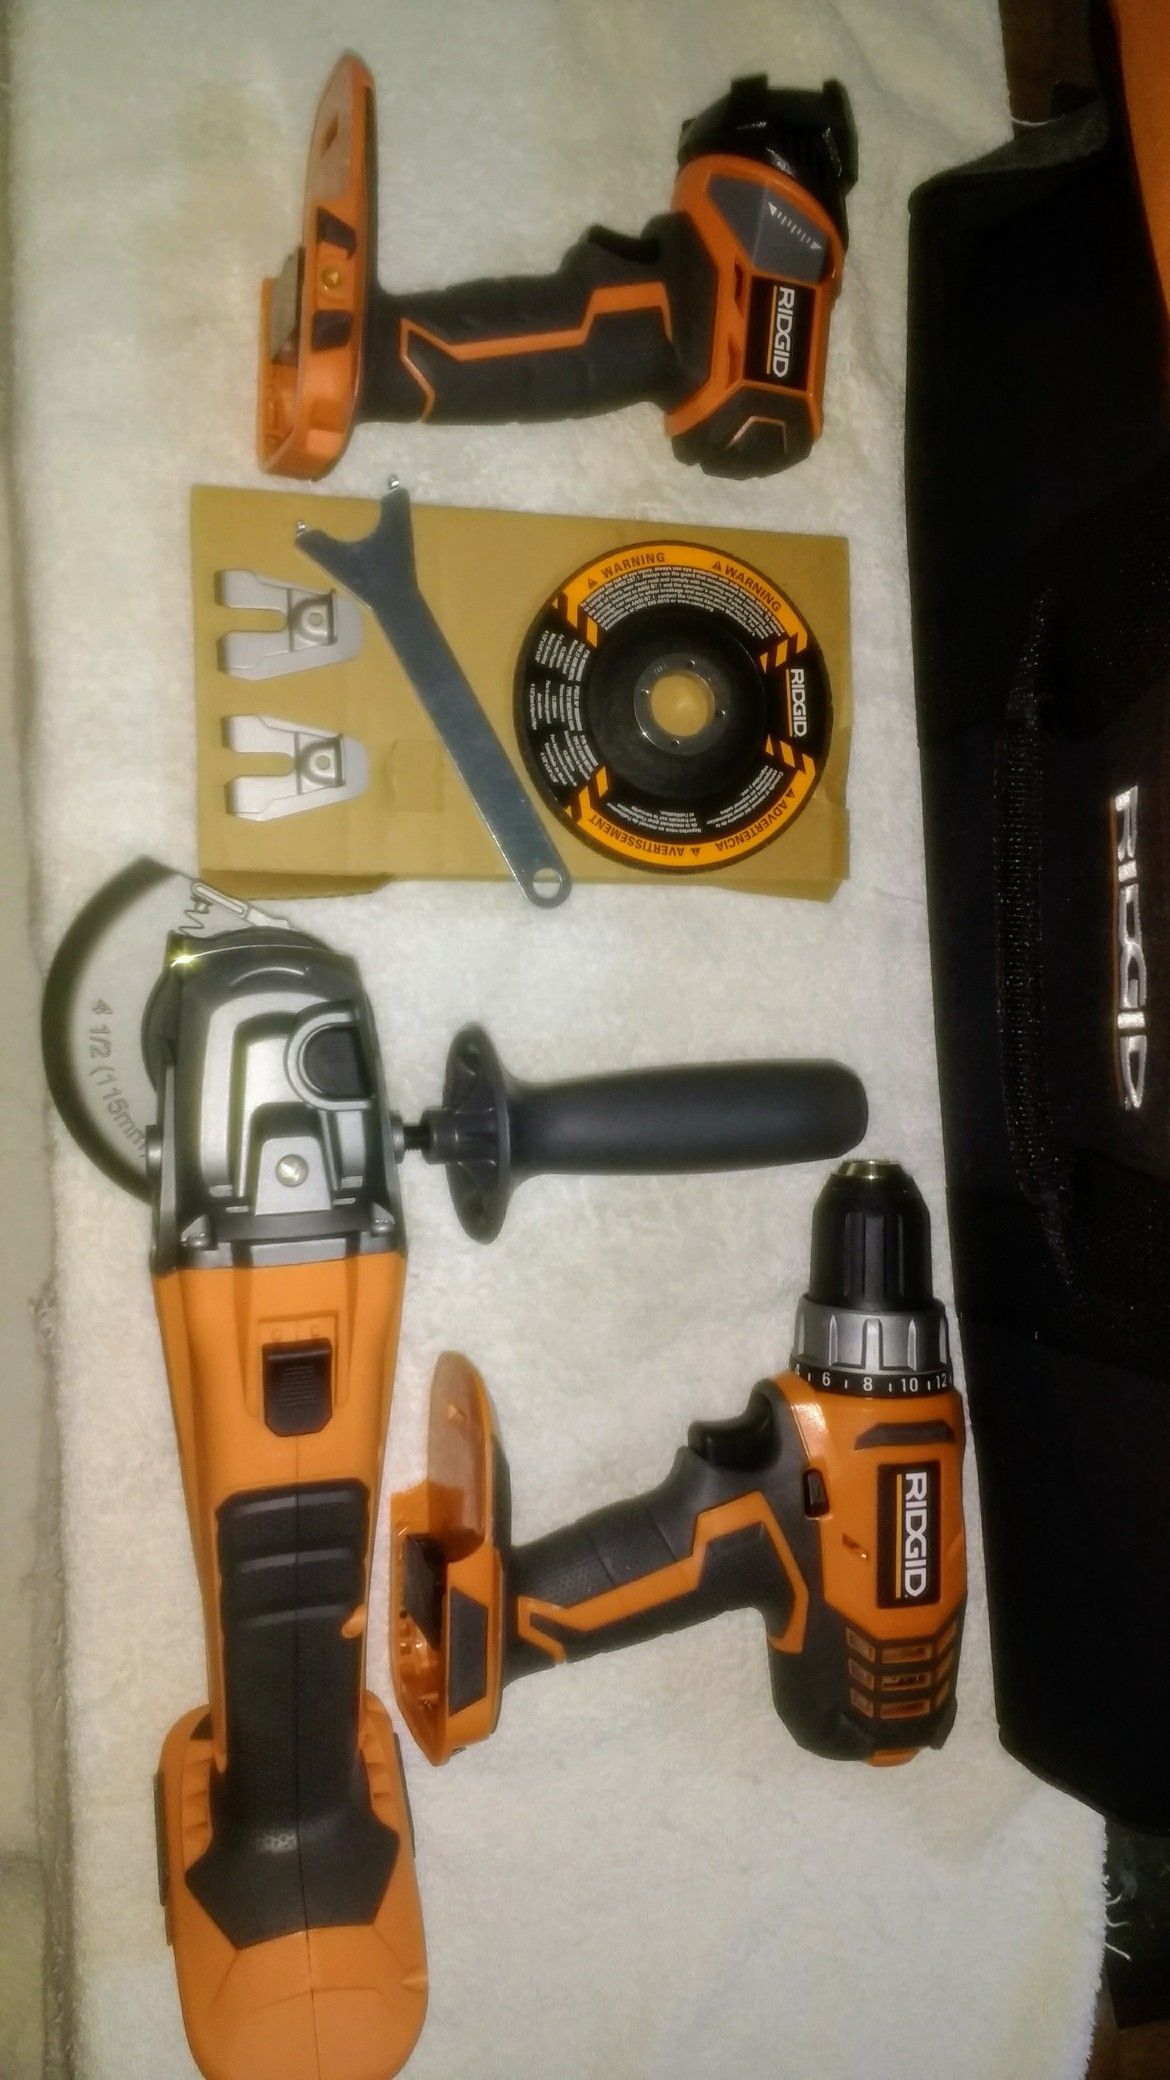 Ridgid Drill, Torch Light and Angle Grinder 18 volts